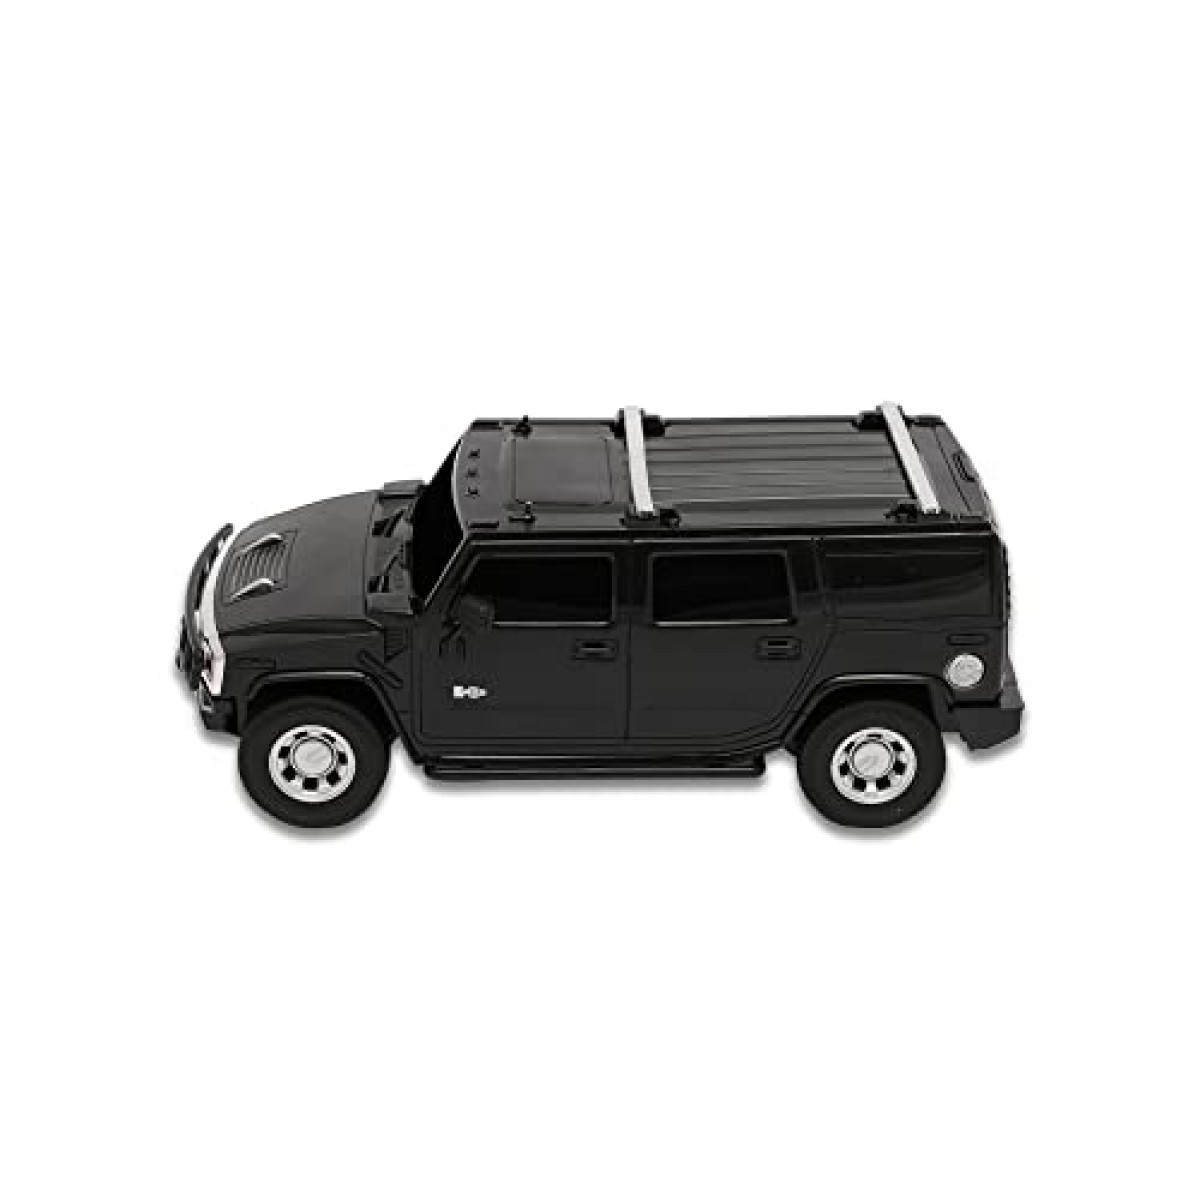 Road Burner Rechargable Remote Control Car for Kids Hummer H2 Full Function, 1:24 Scale Pack of 1, Black, Age 6Y+